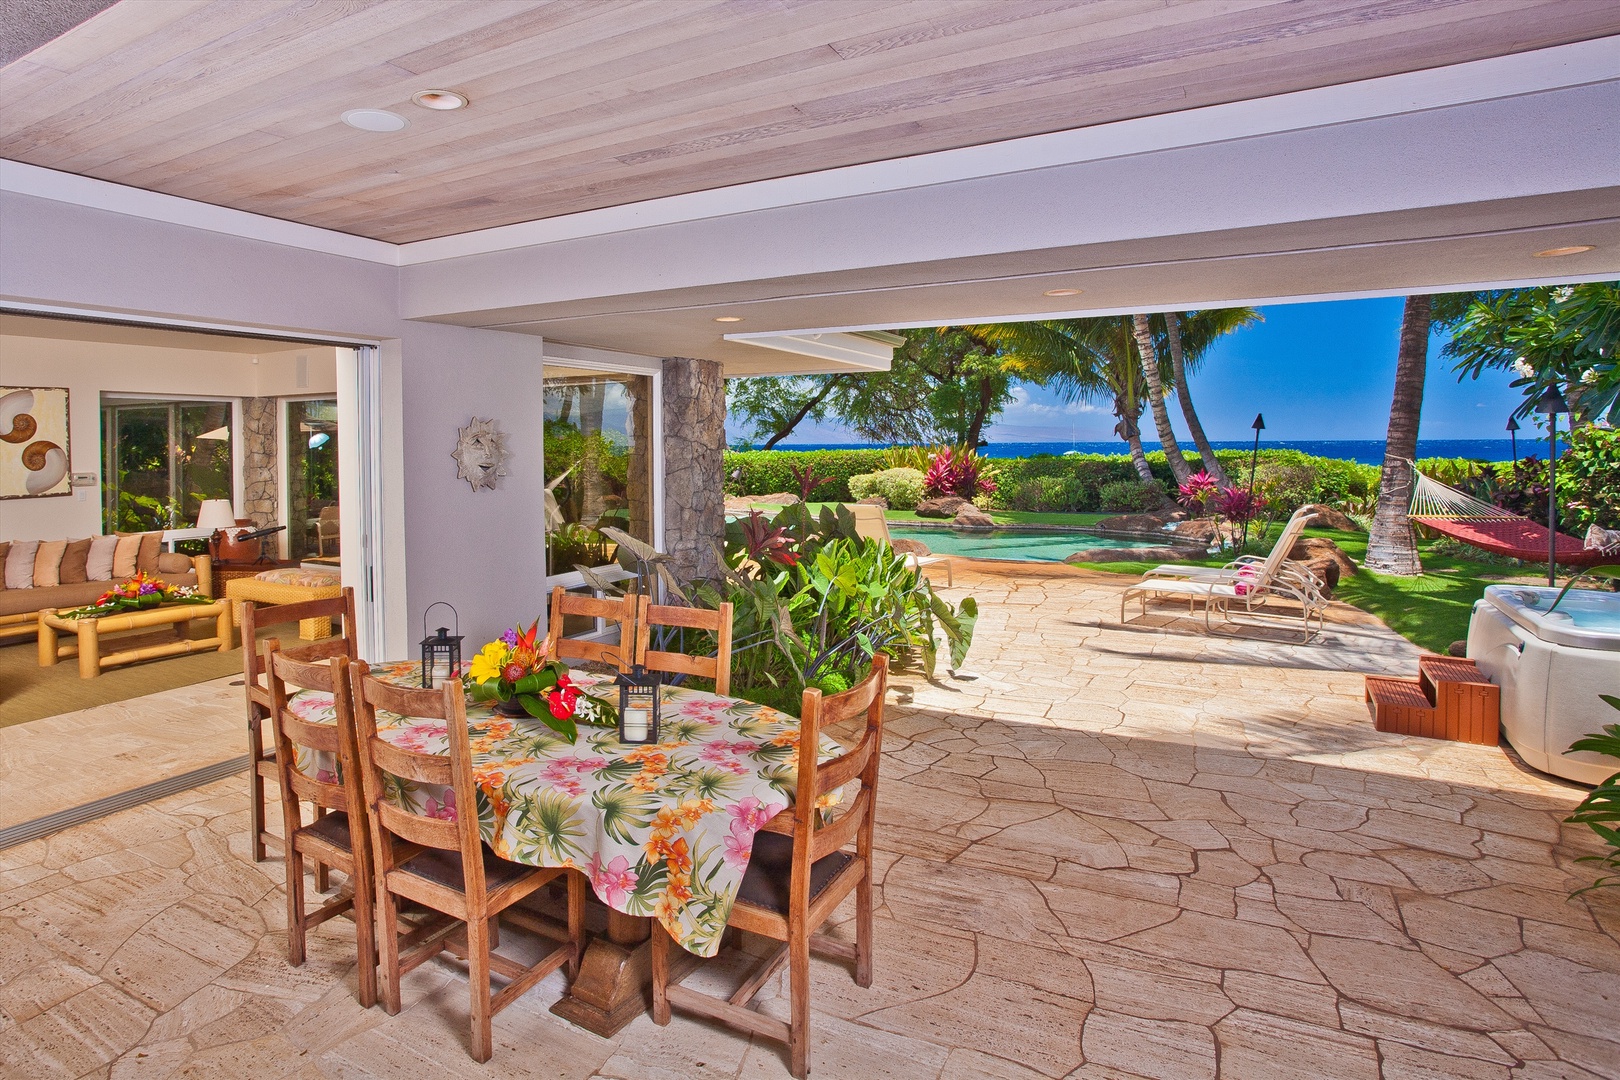 Kaanapali Vacation Rentals, Sea Shells Beach House on Ka`anapali Beach* - Sea Shells Beach House - Covered Outdoor Casual Dining and BBQ Area